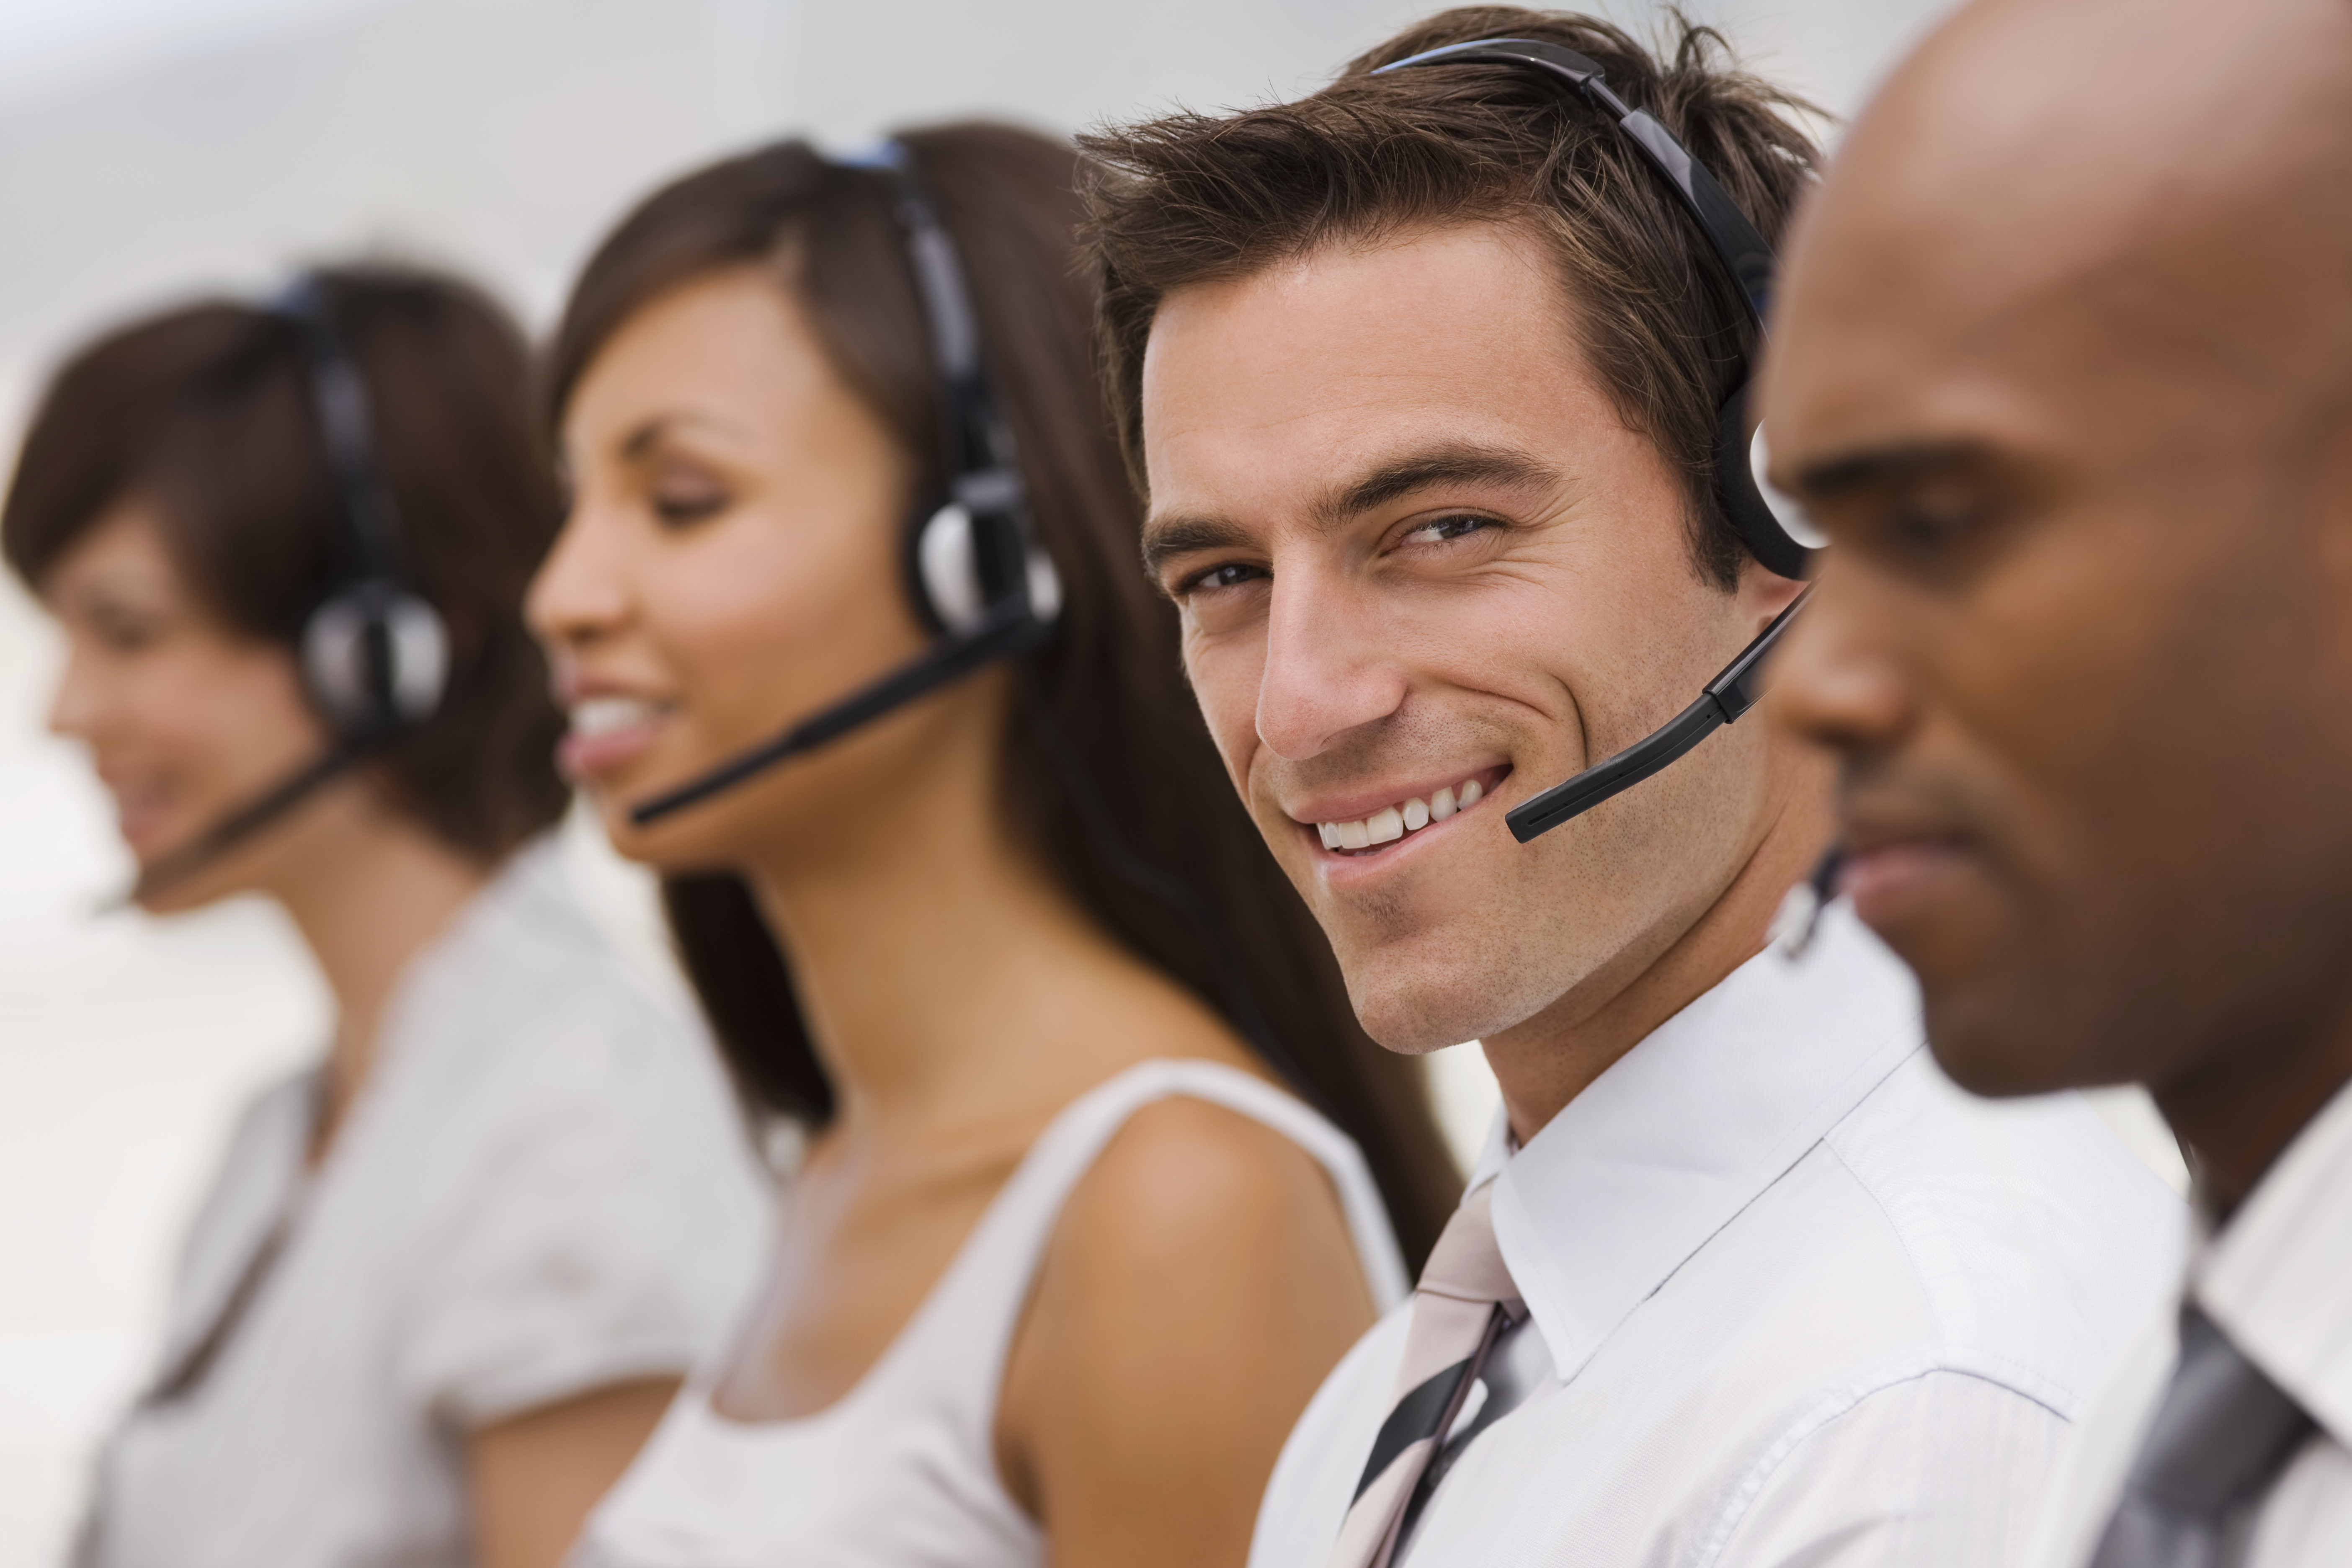 crmls customer care ccd faqs featured